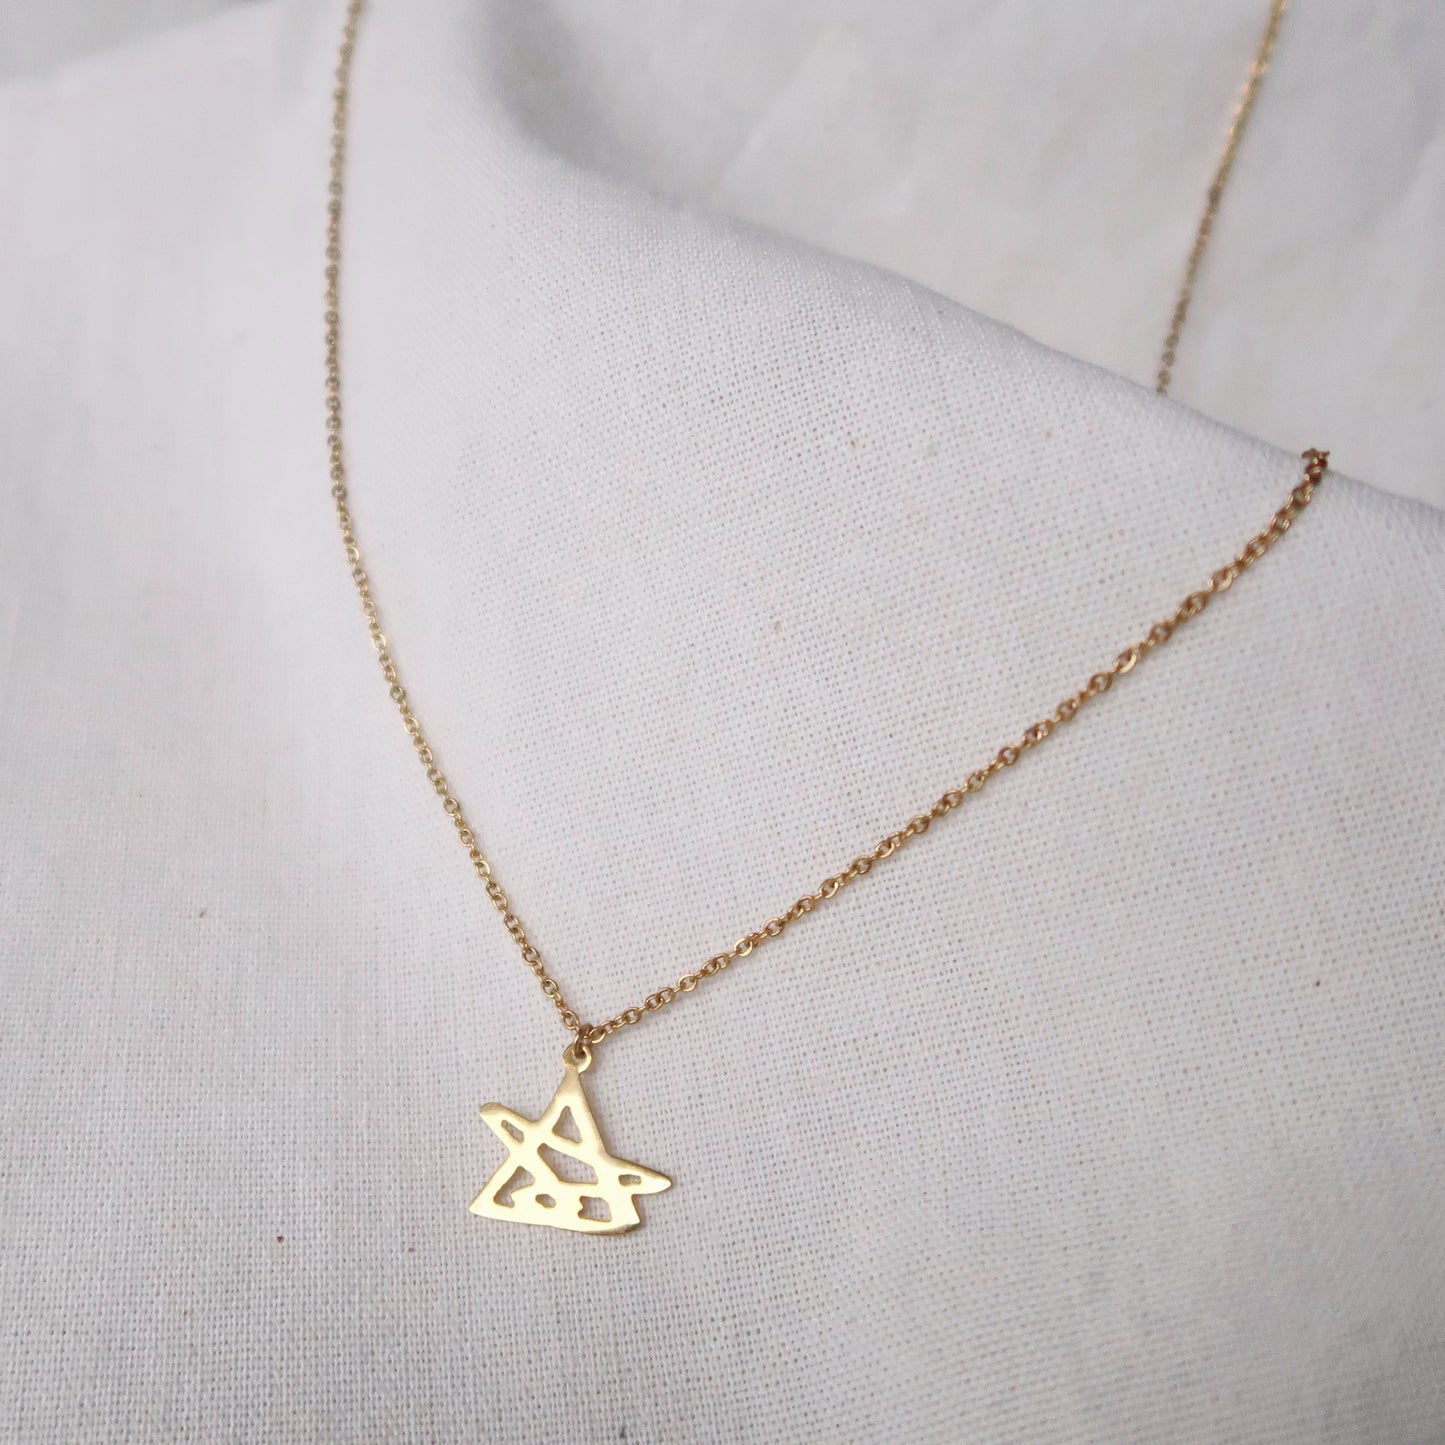 LAY'S STAR NECKLACE